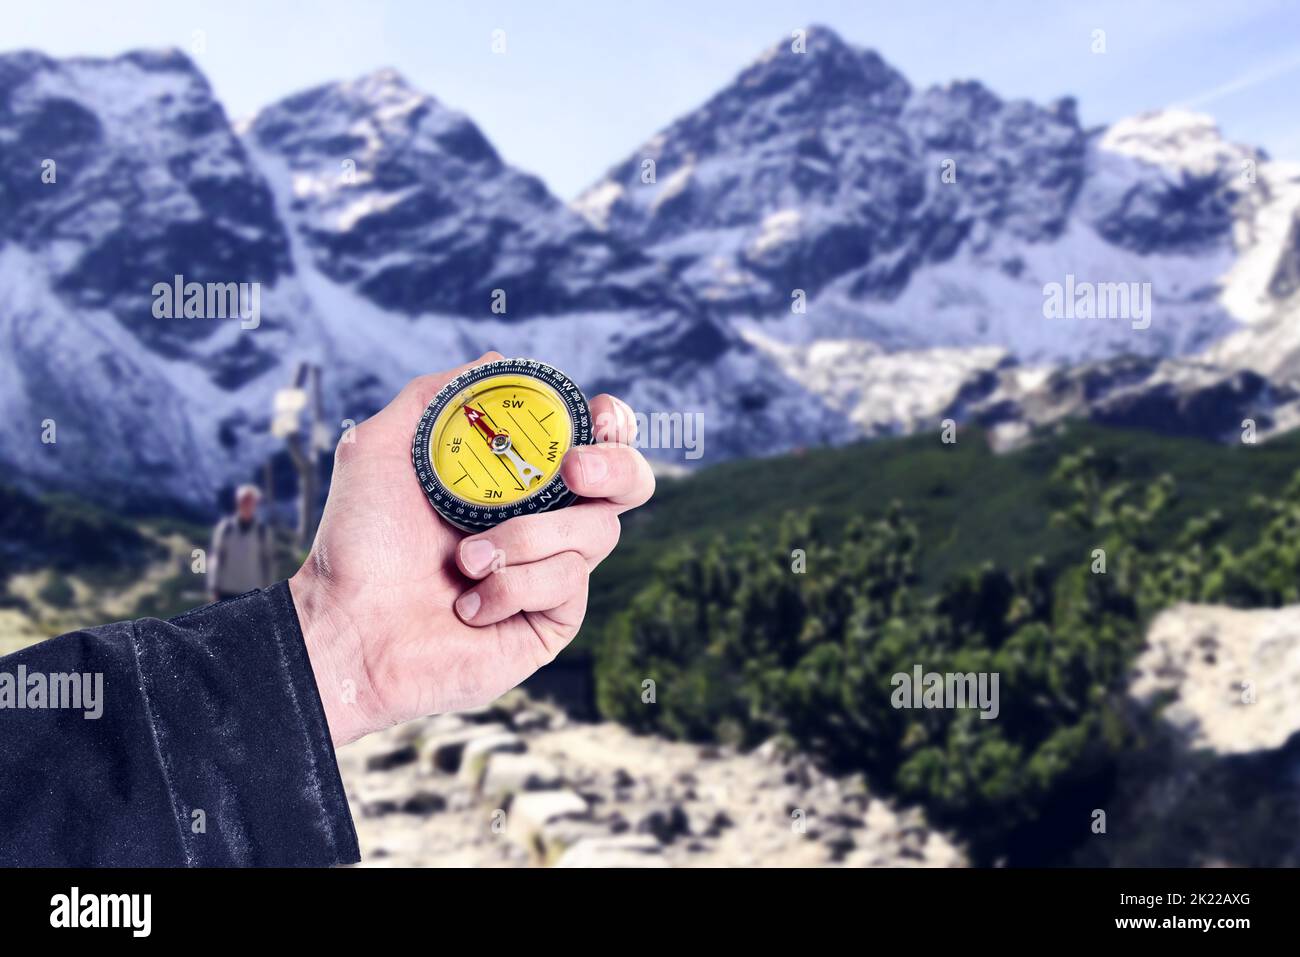 Hell always know where to go. a mans hand holding up a compass against extreme terrain. Stock Photo